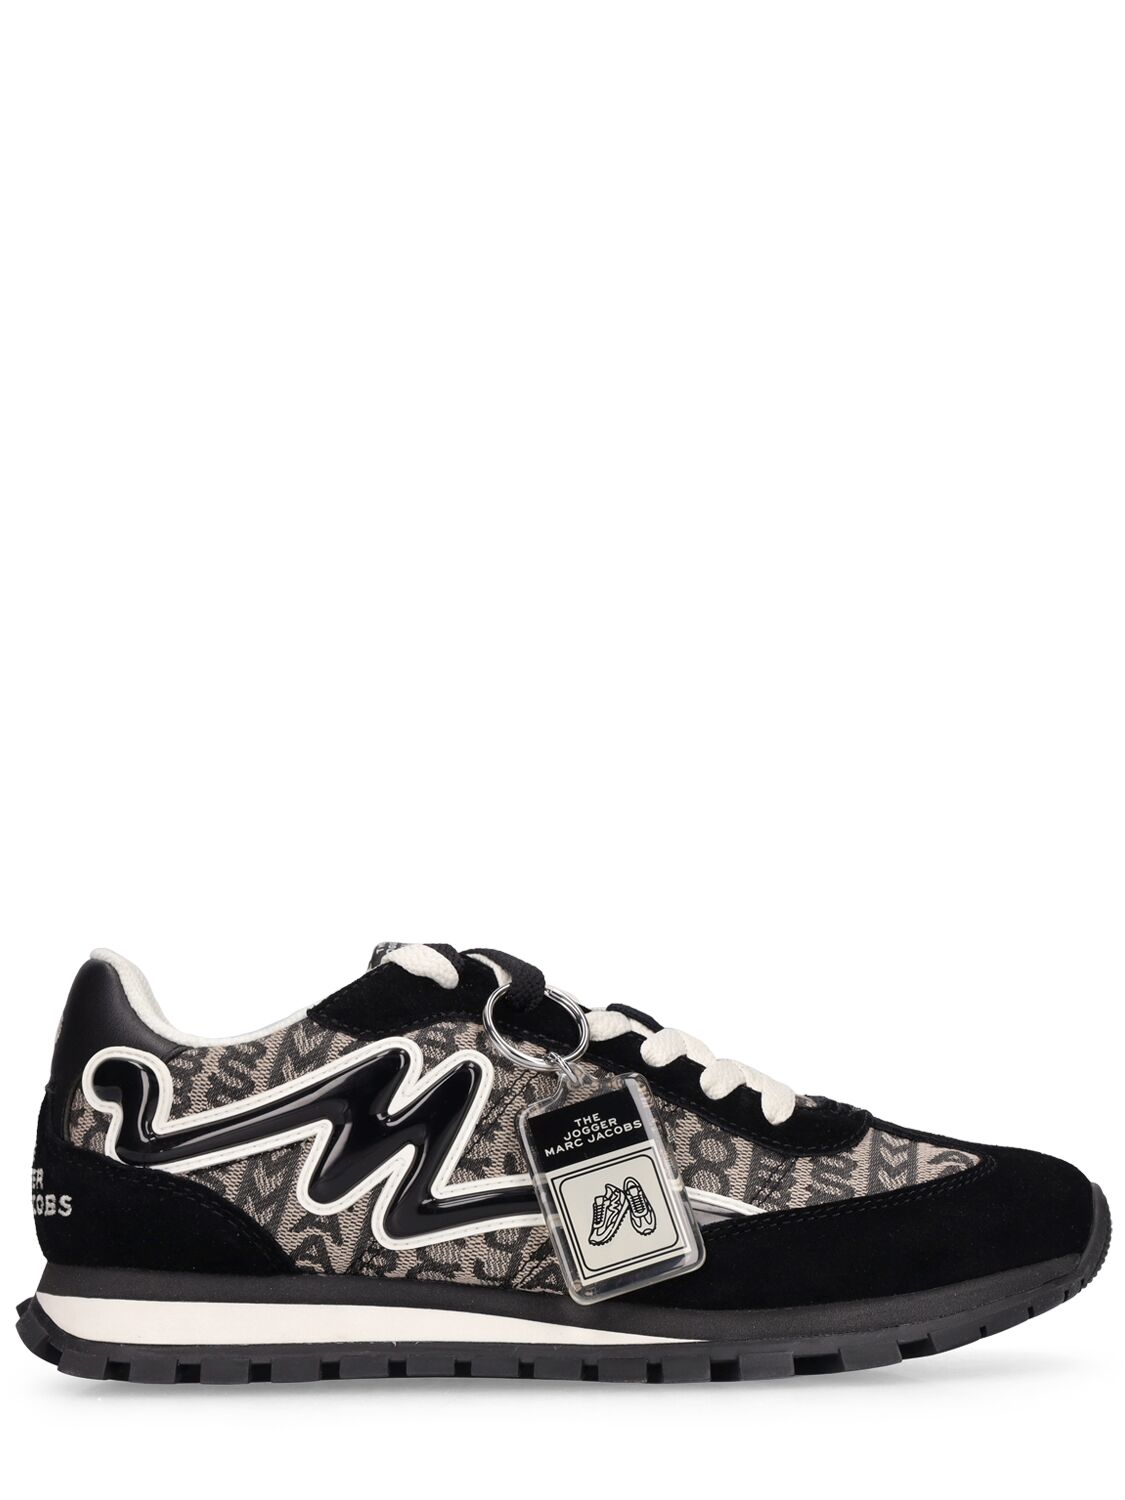 Image of The Monogram Cotton Blend Sneakers